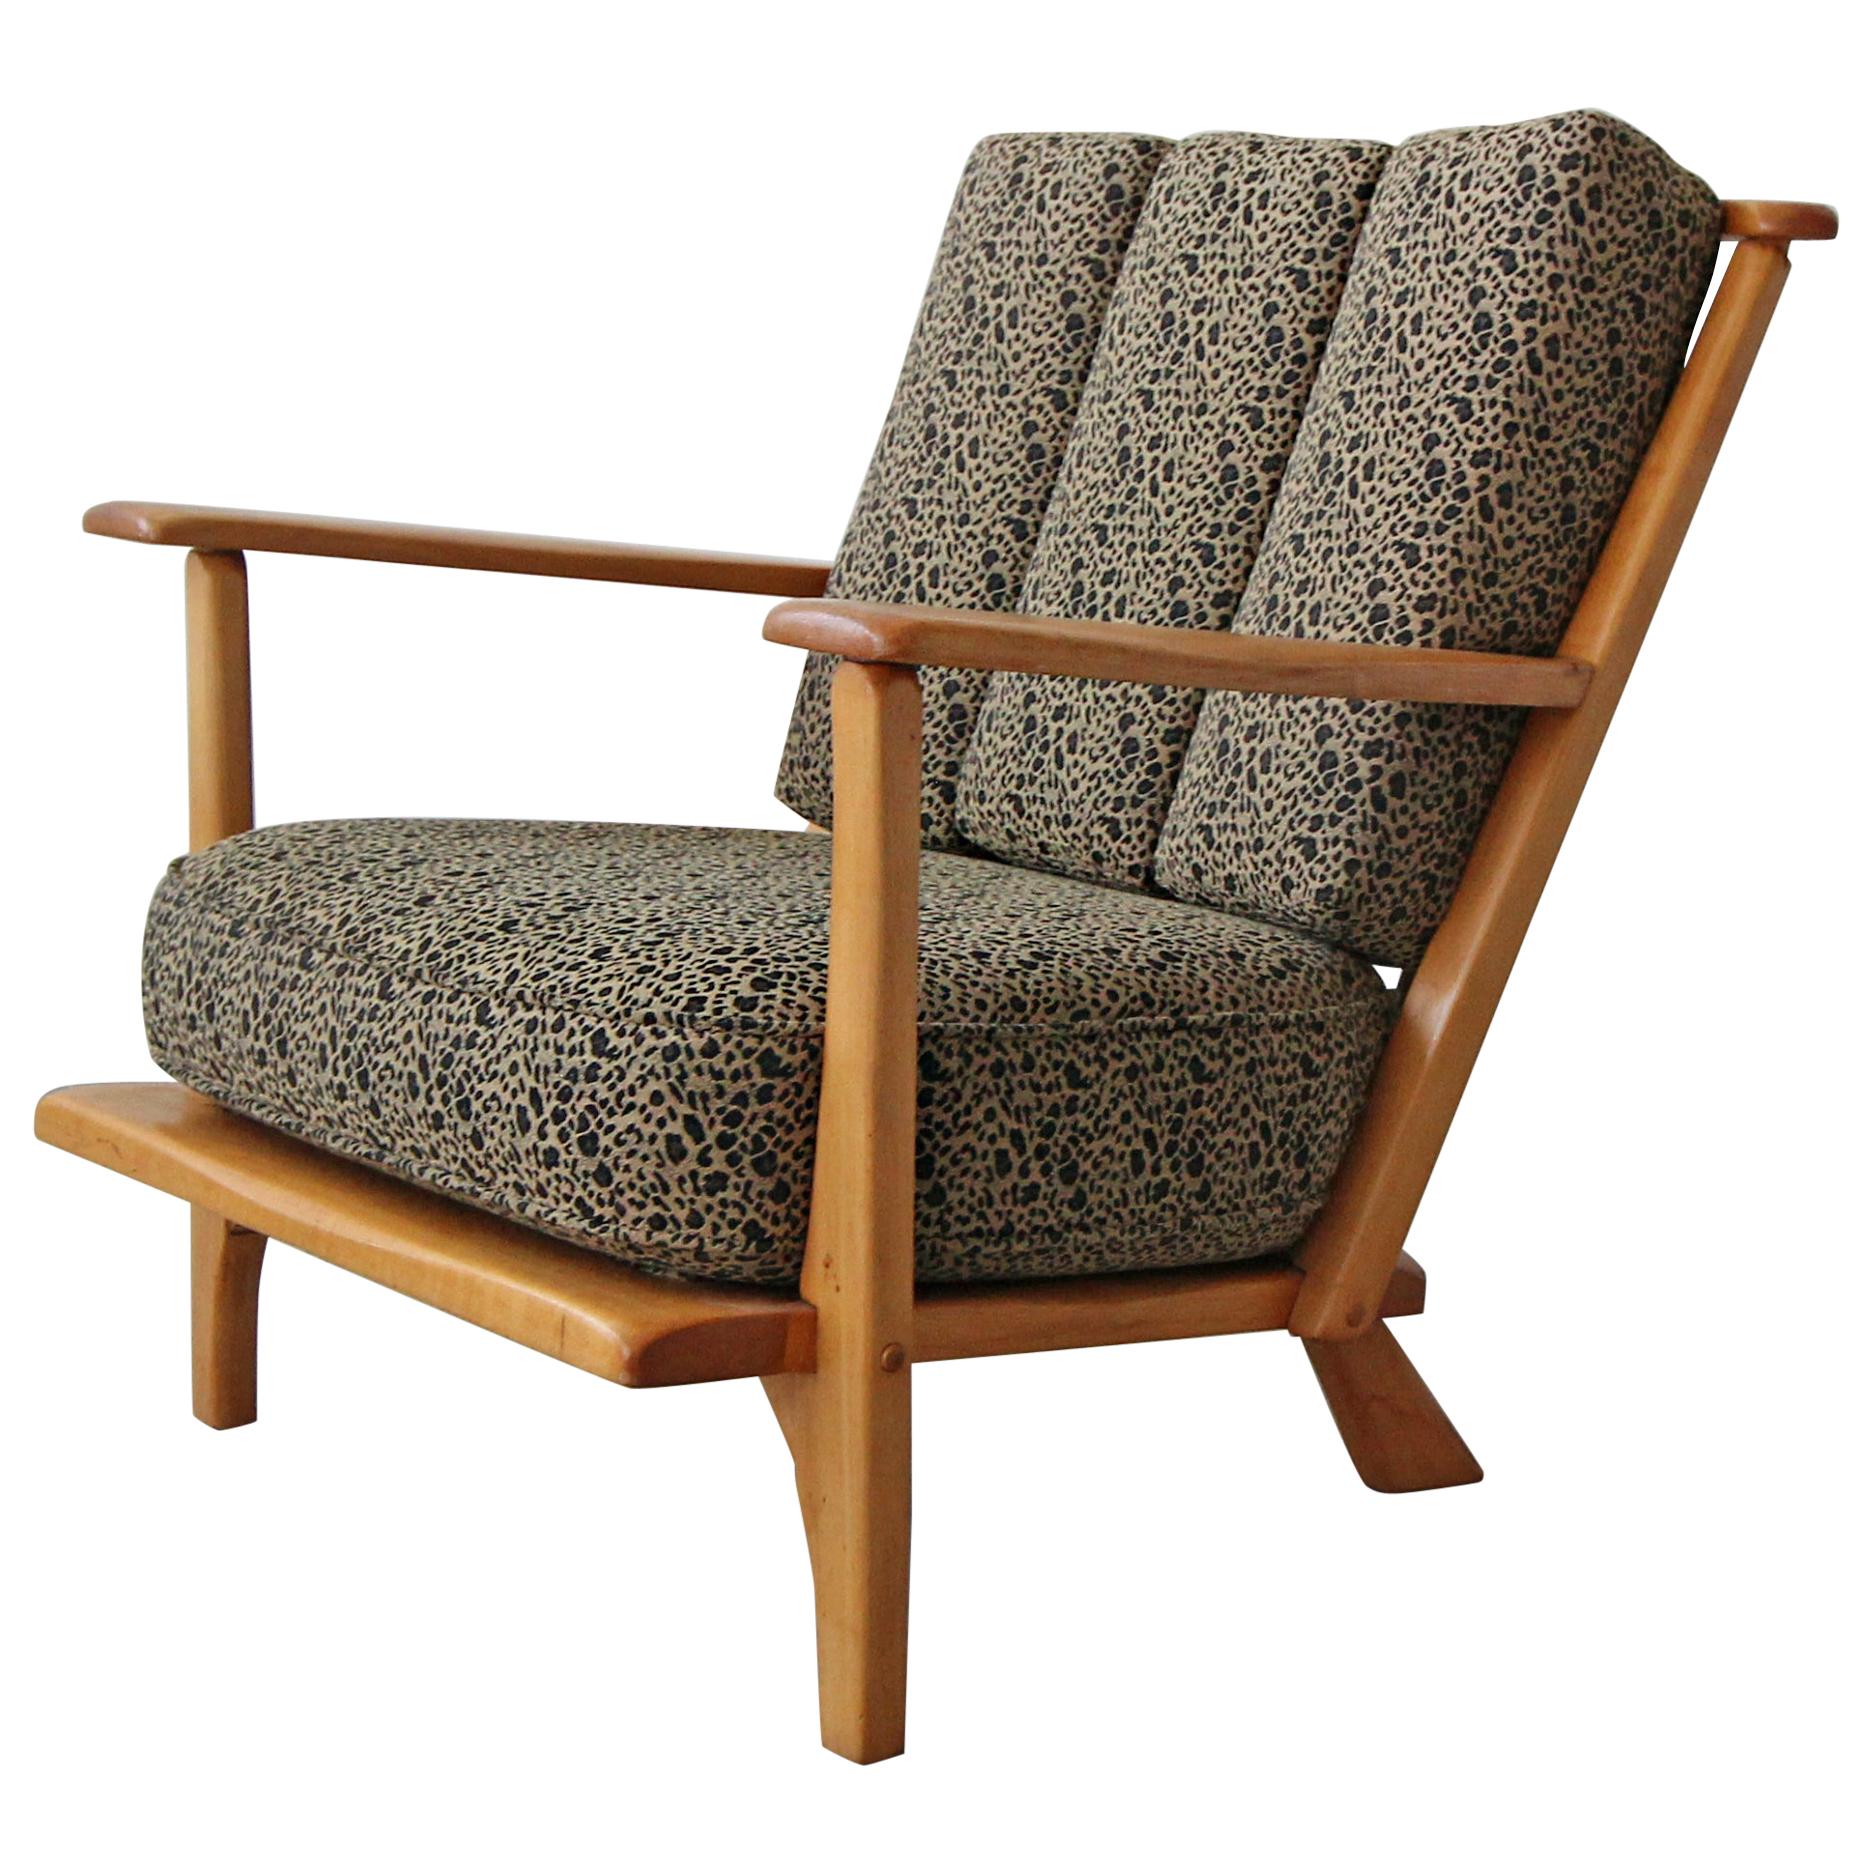 Early Midcentury Craftsman Style Maple Lounge Chair by Cushman